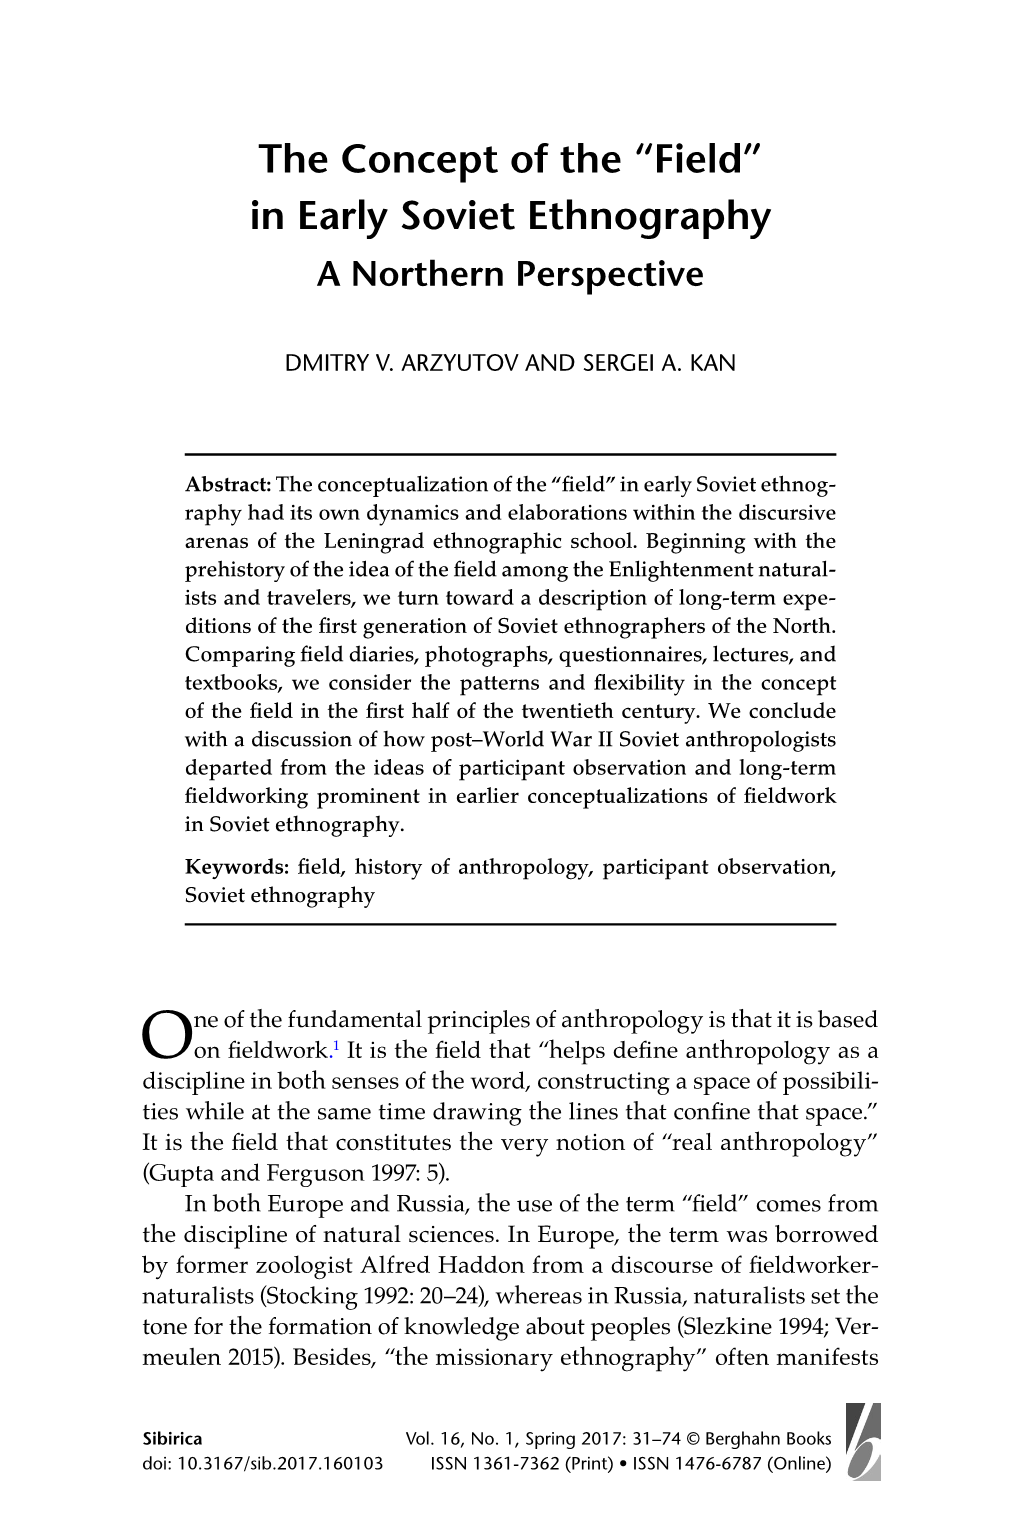 In Early Soviet Ethnography a Northern Perspective